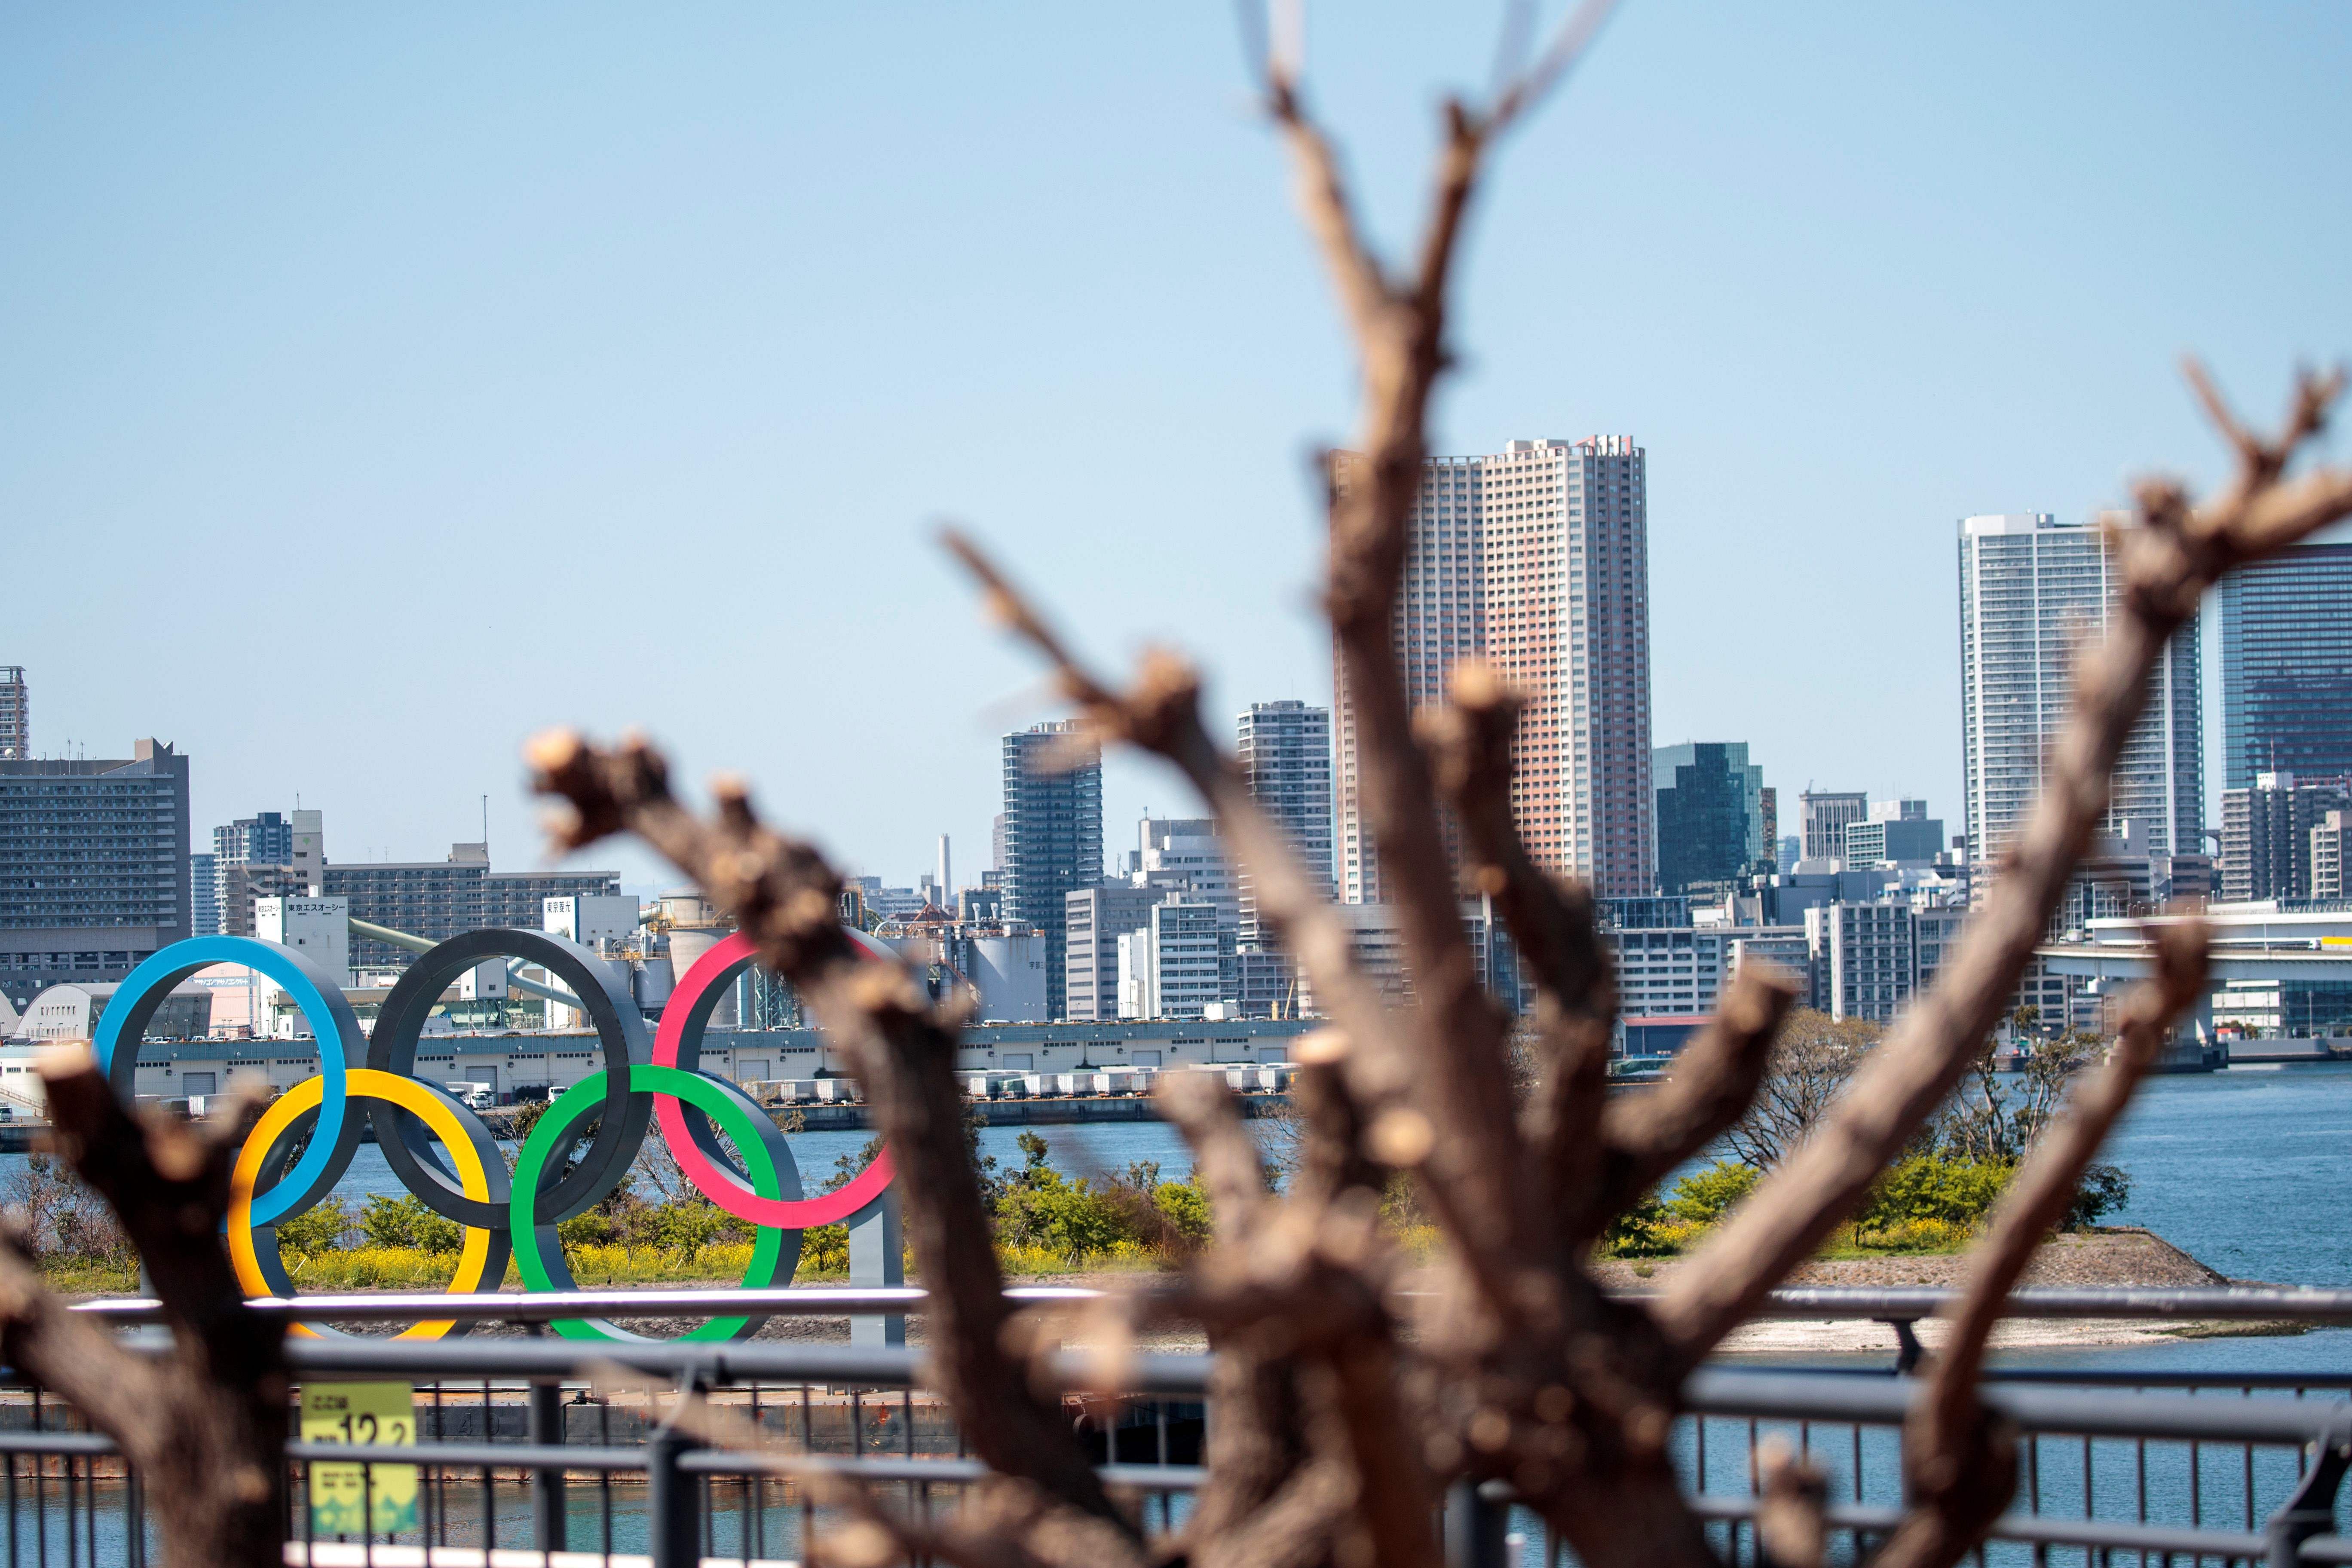 The Olympic rings are seen through the branches of a tree in Tokyo's Odaiba district. (Credit: AFP)